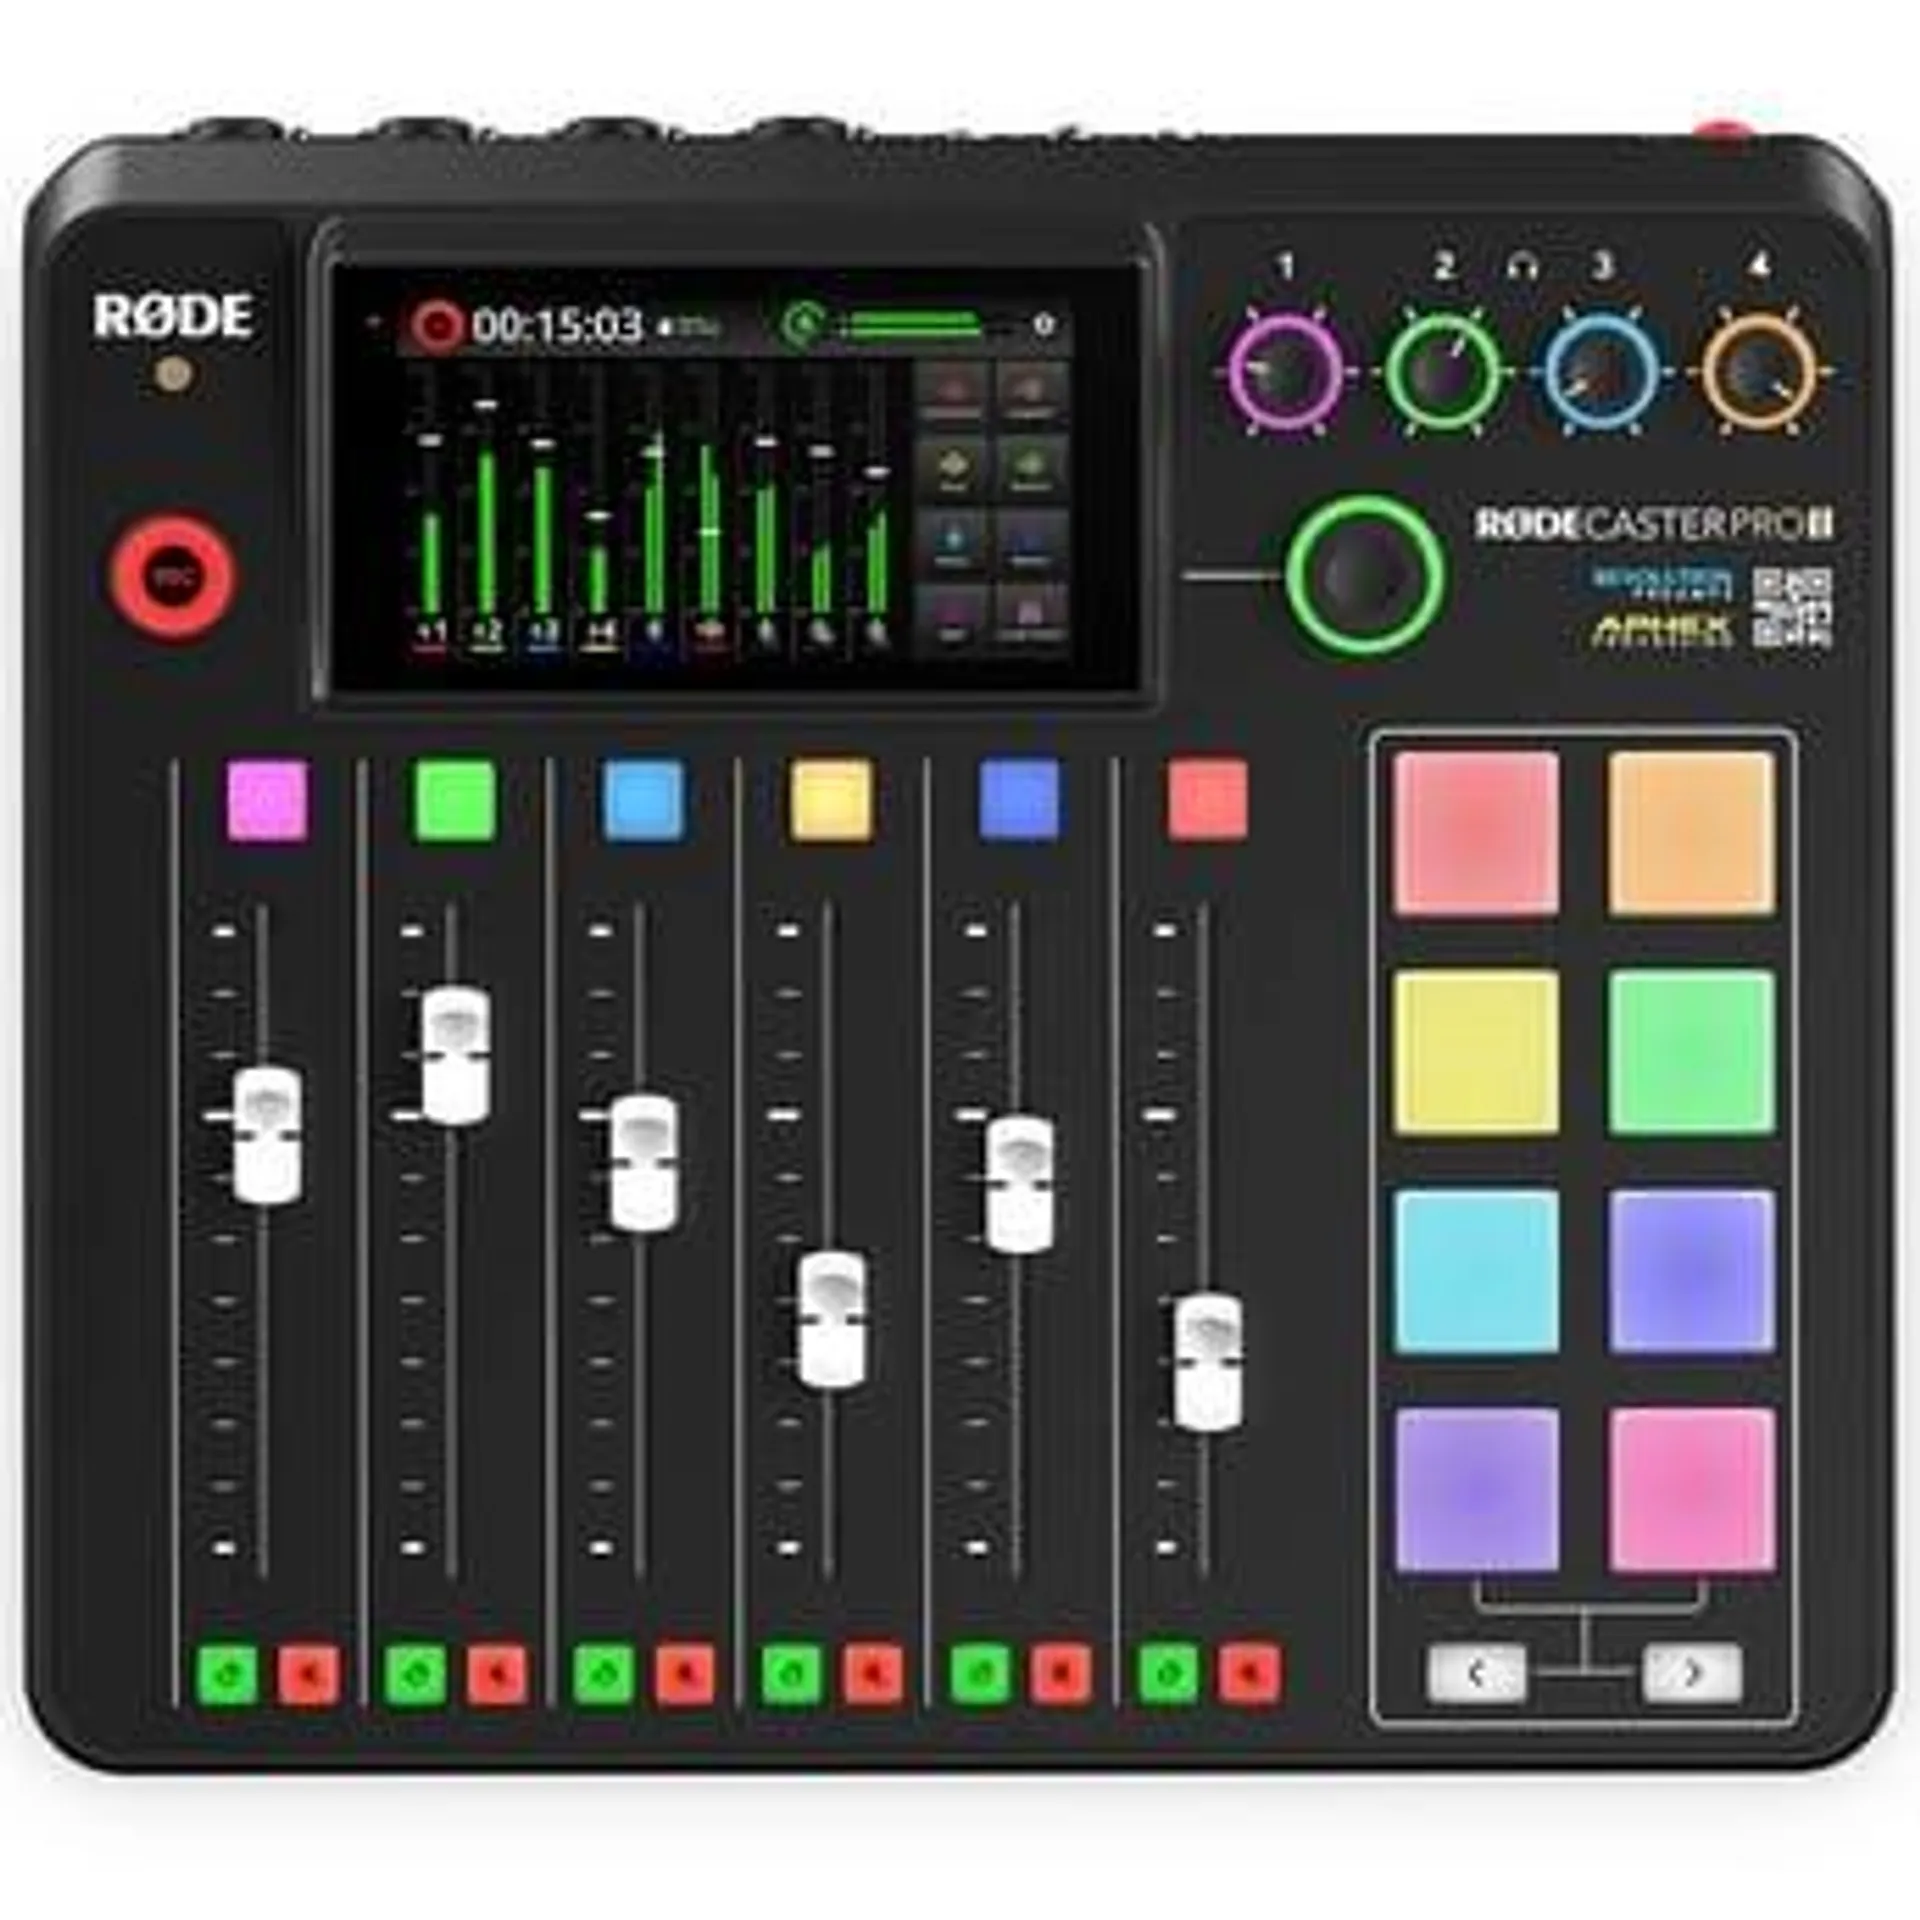 RODE RODECaster Pro II Integrated Audio Production Studio + Free RODE NTH-100 Over-Ear Professional Headphones